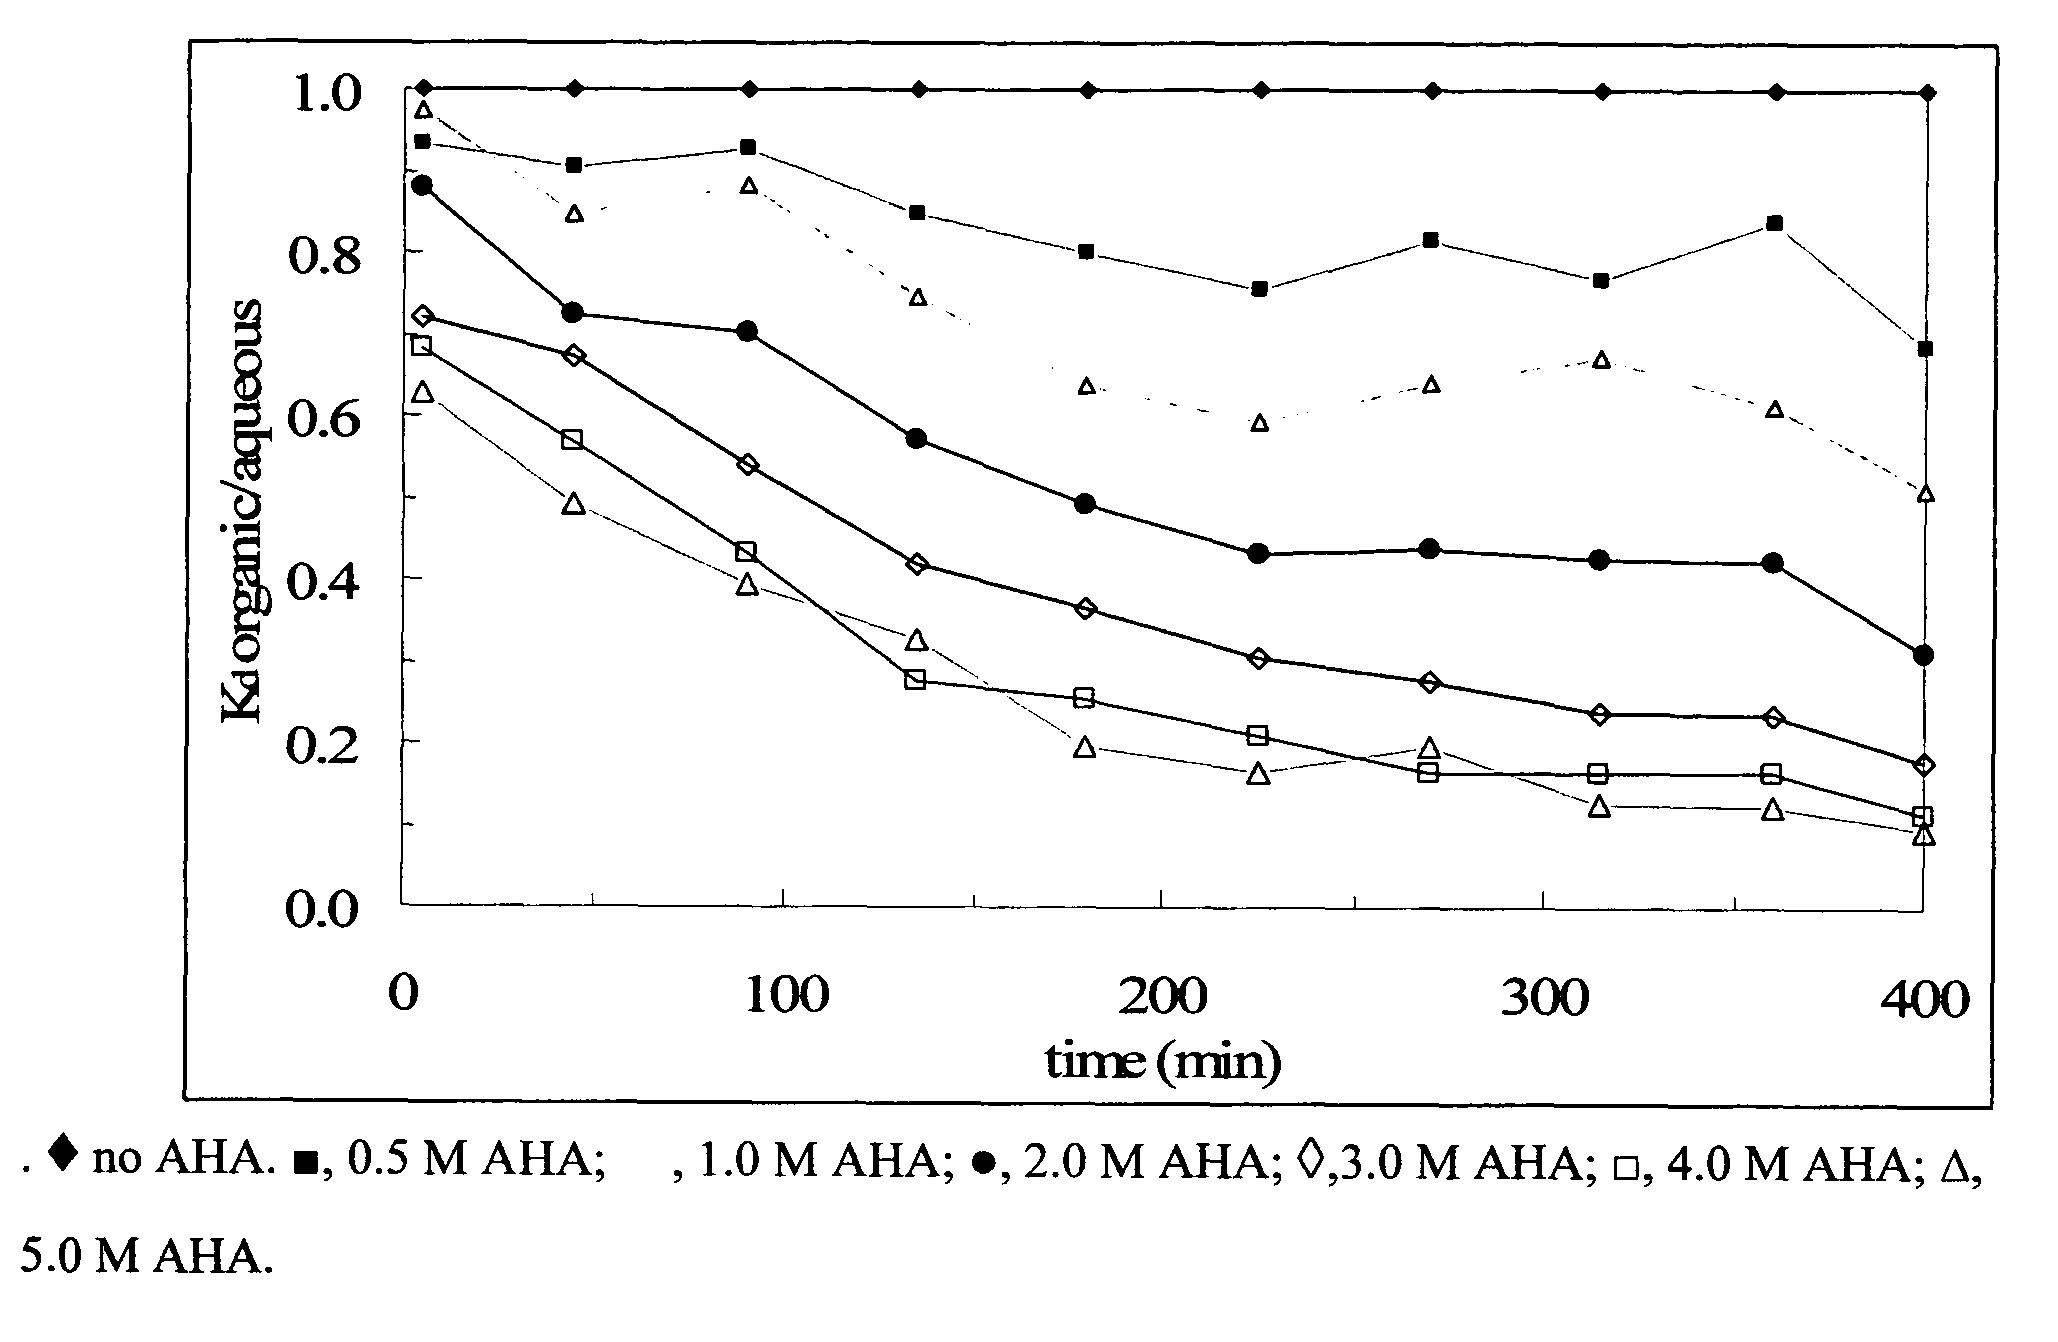 Process for the extraction of technetium from uranium